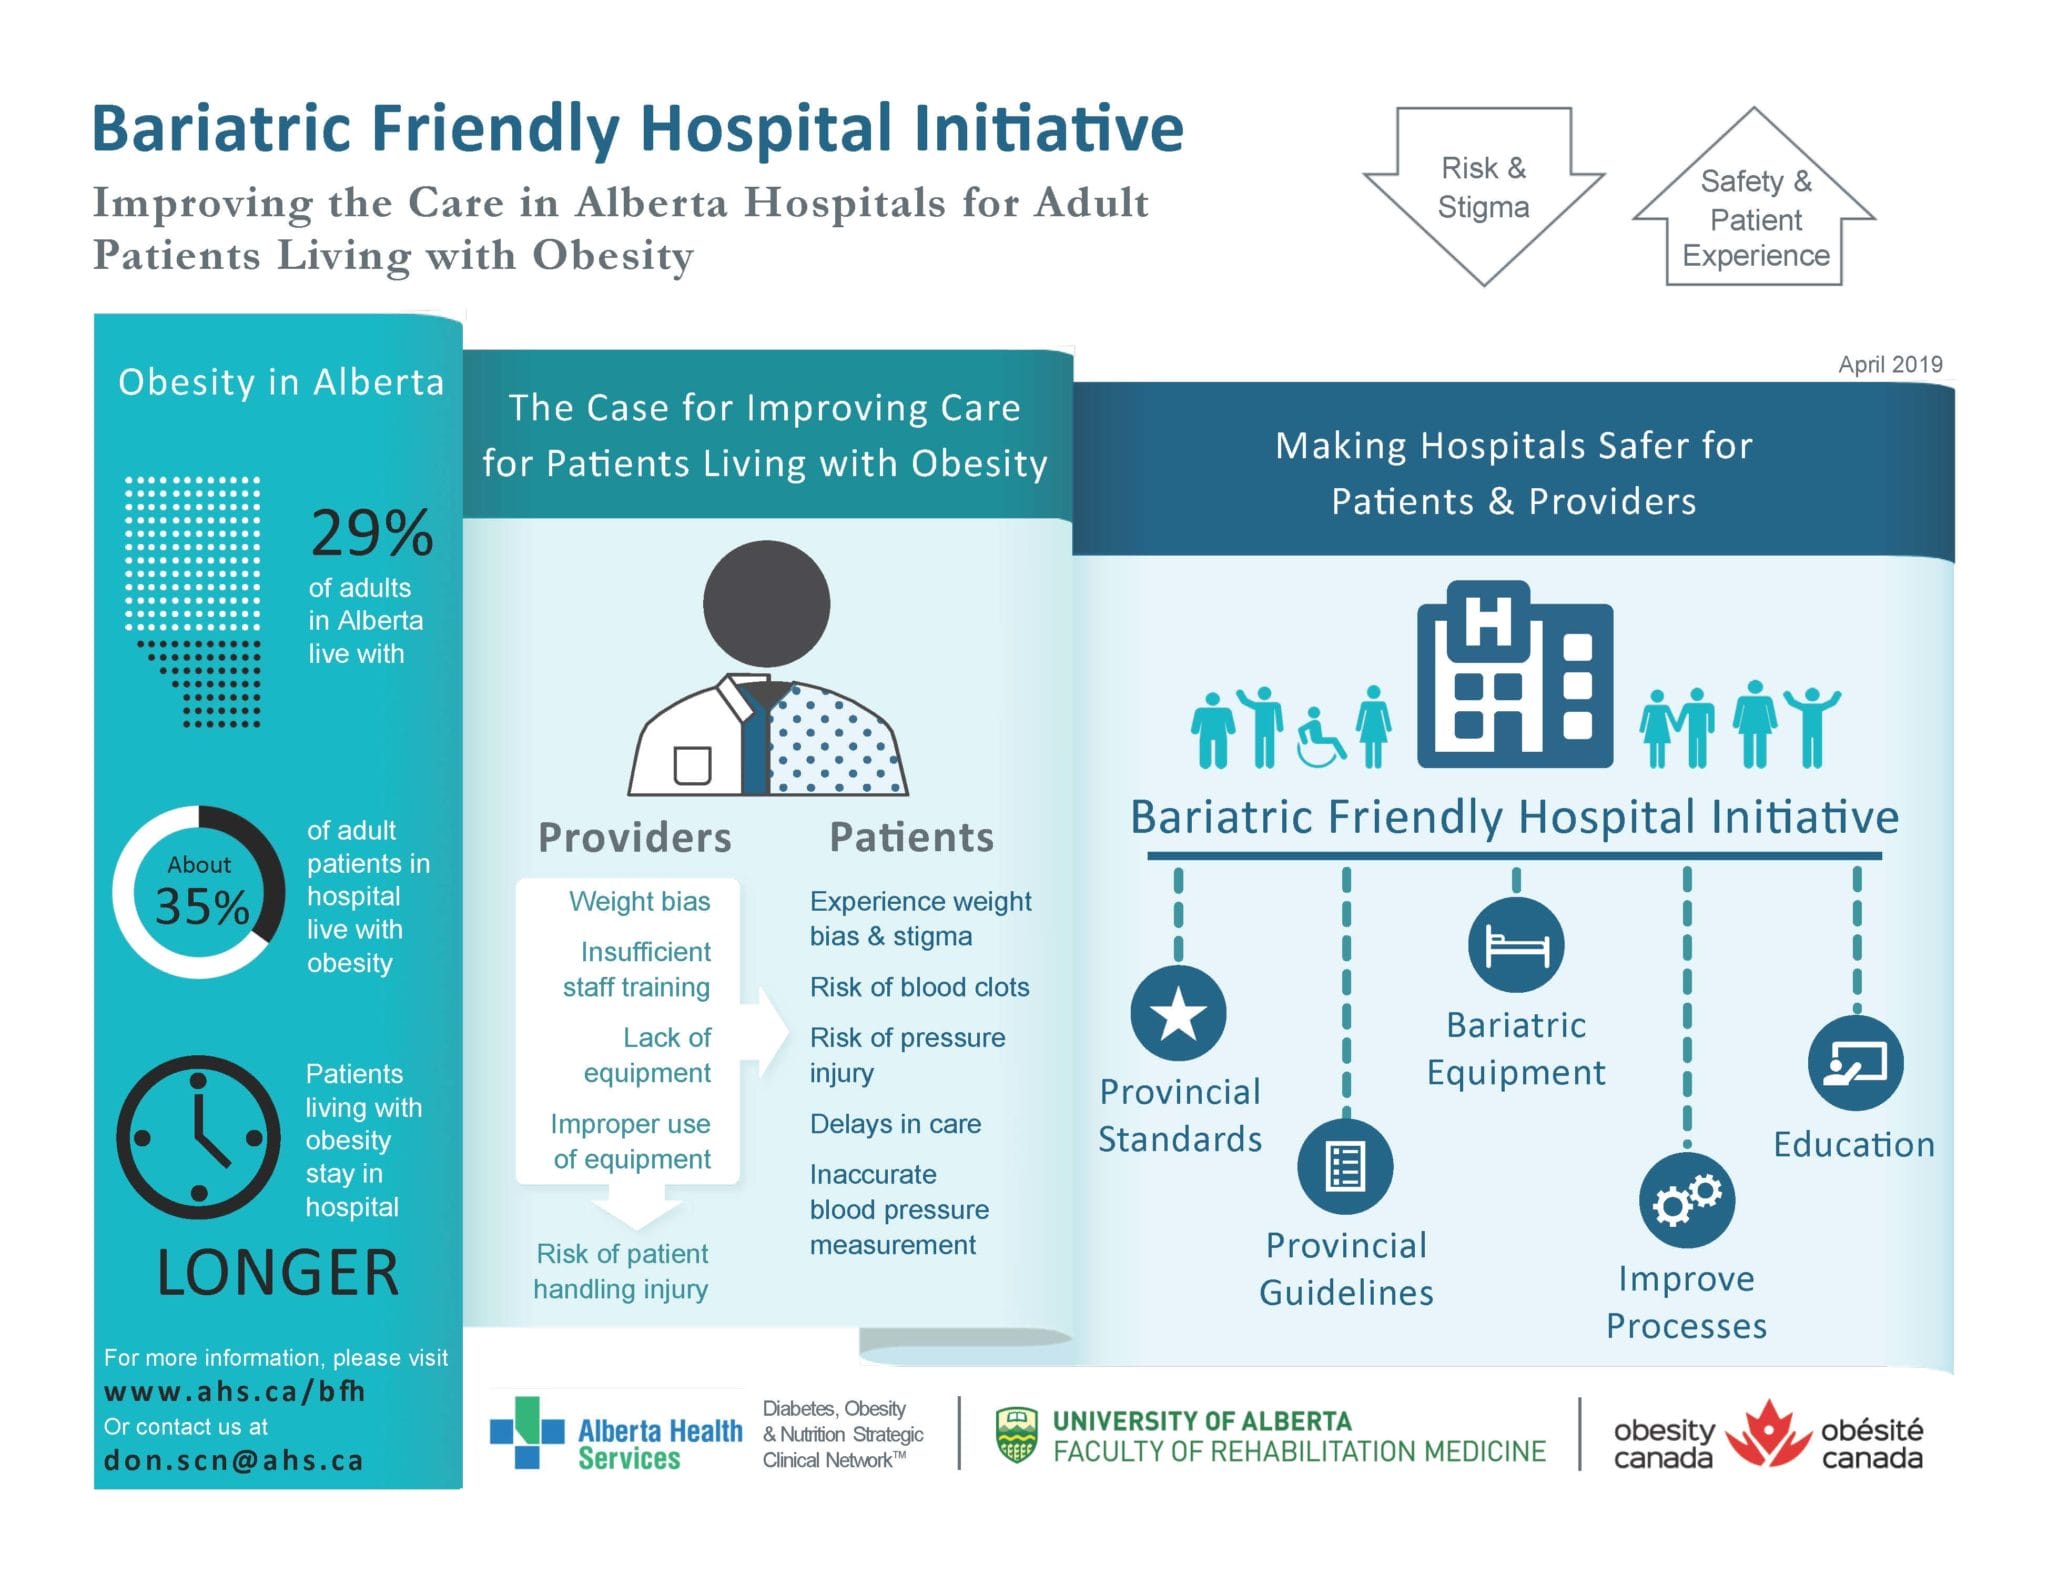 Infographic explaining the bariatric friendly hospital initiative to improve care for obese patients in alberta, highlighting obesity facts, provider and patient challenges, and initiative goals.